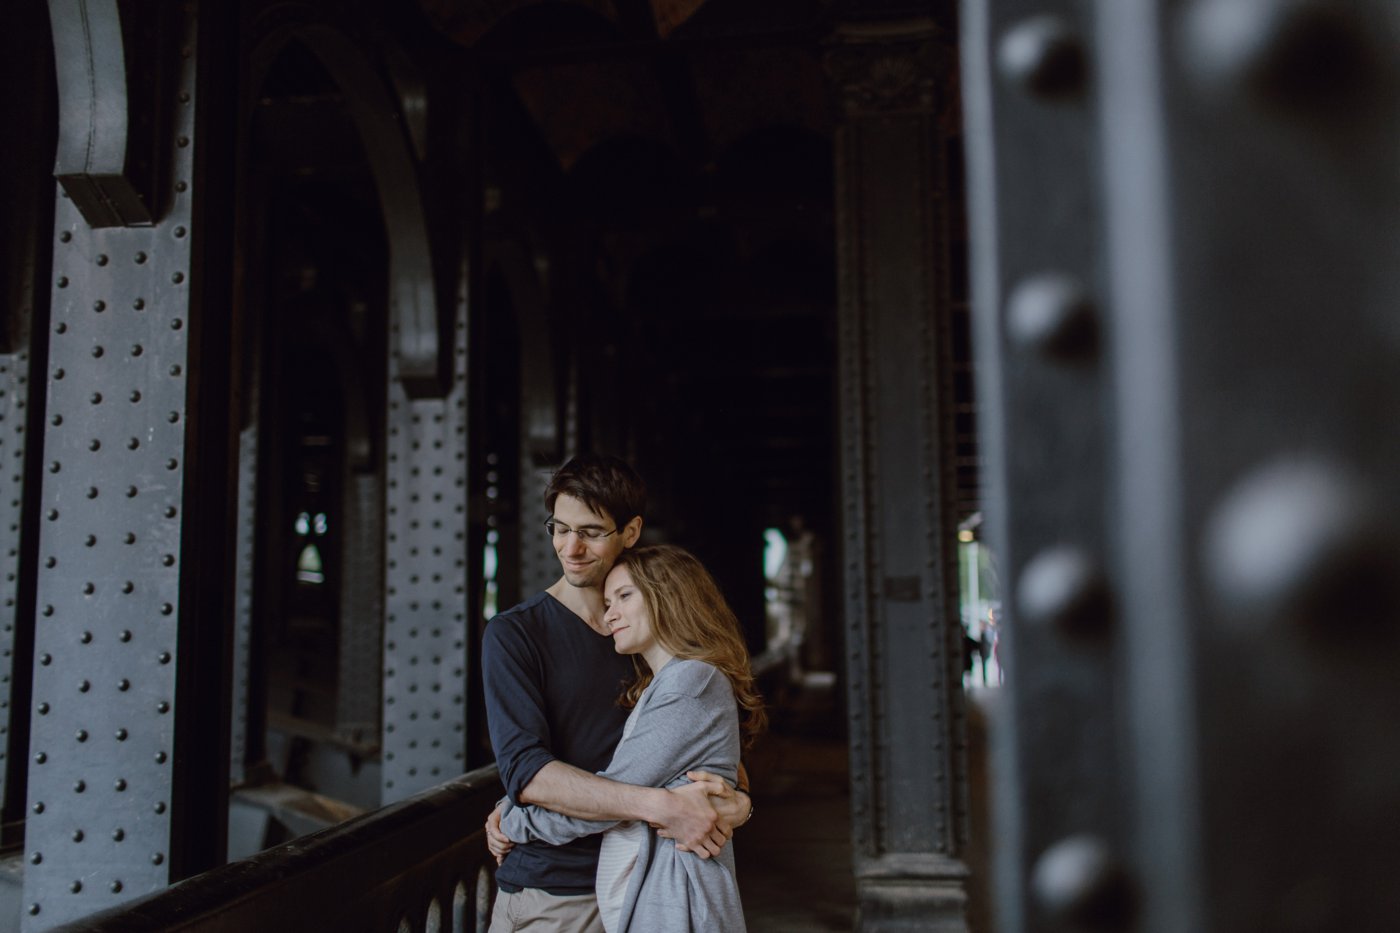 Intimate Paris Engagement Session by Megan Saul Photography